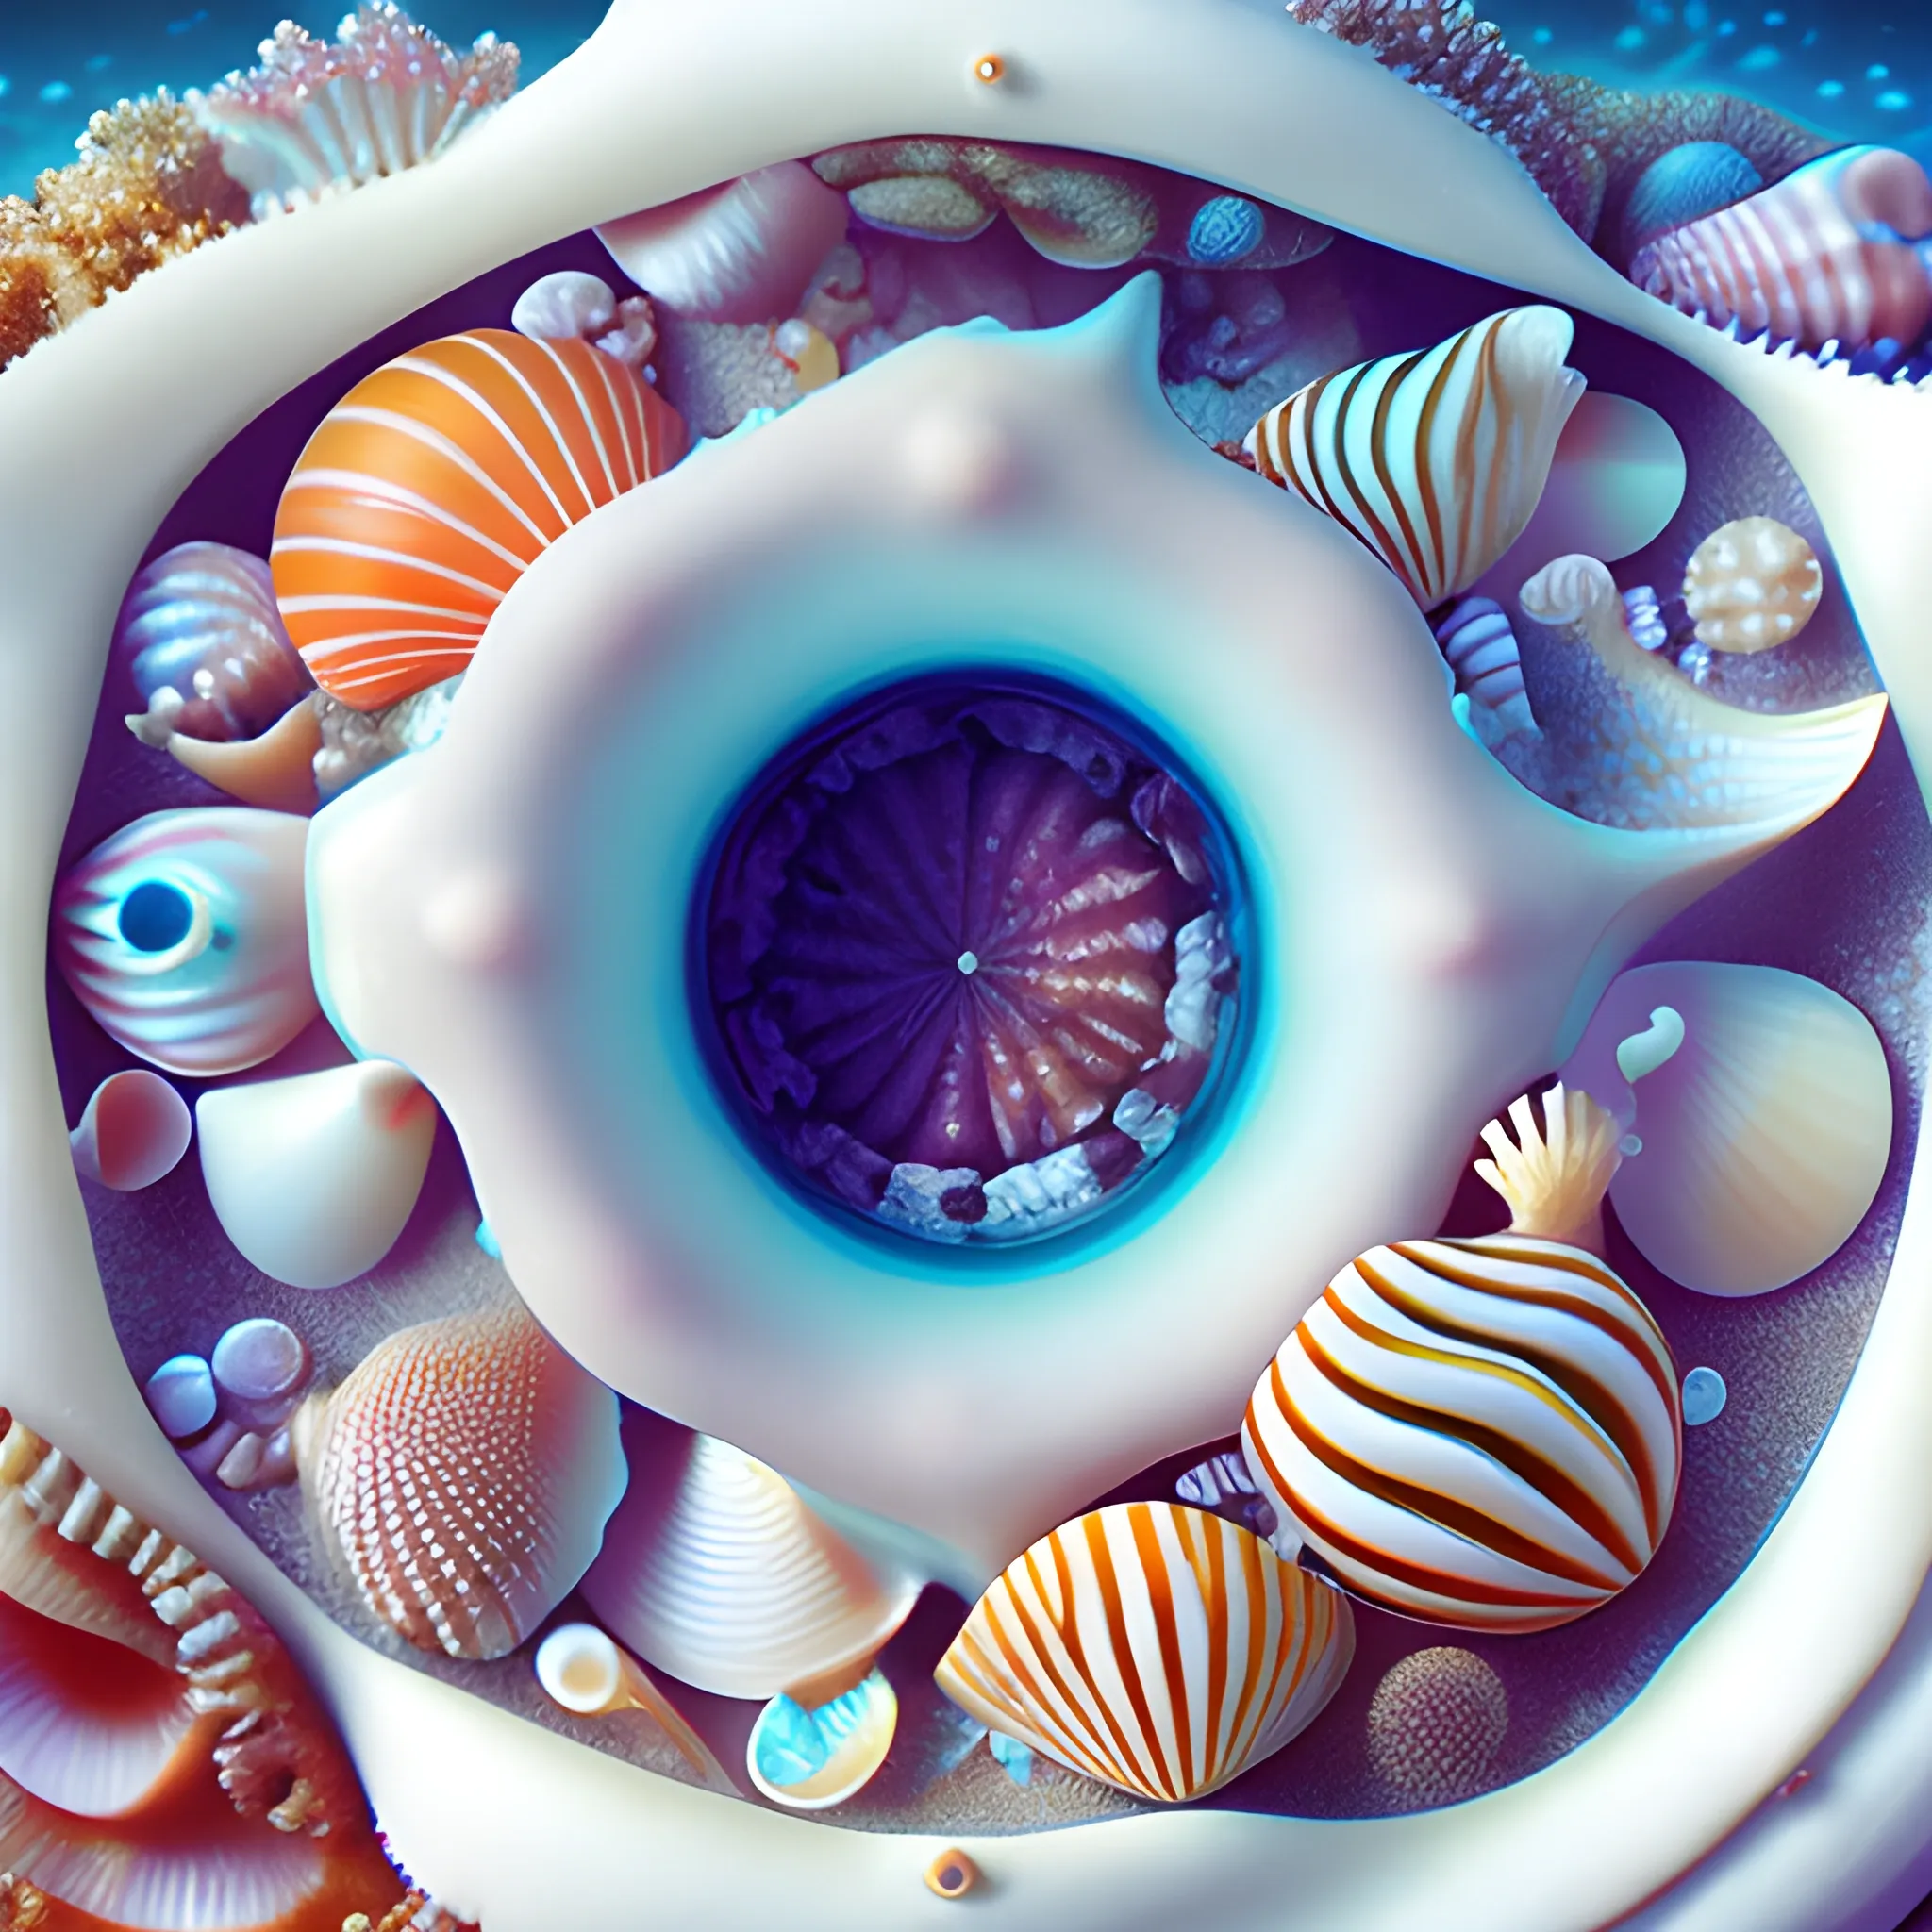 Hyper Realistic, close-up macro shots of unusual sea creatures among dazzling white sands and vivid shells on the seafloor using available light, in the style of underwater photography.